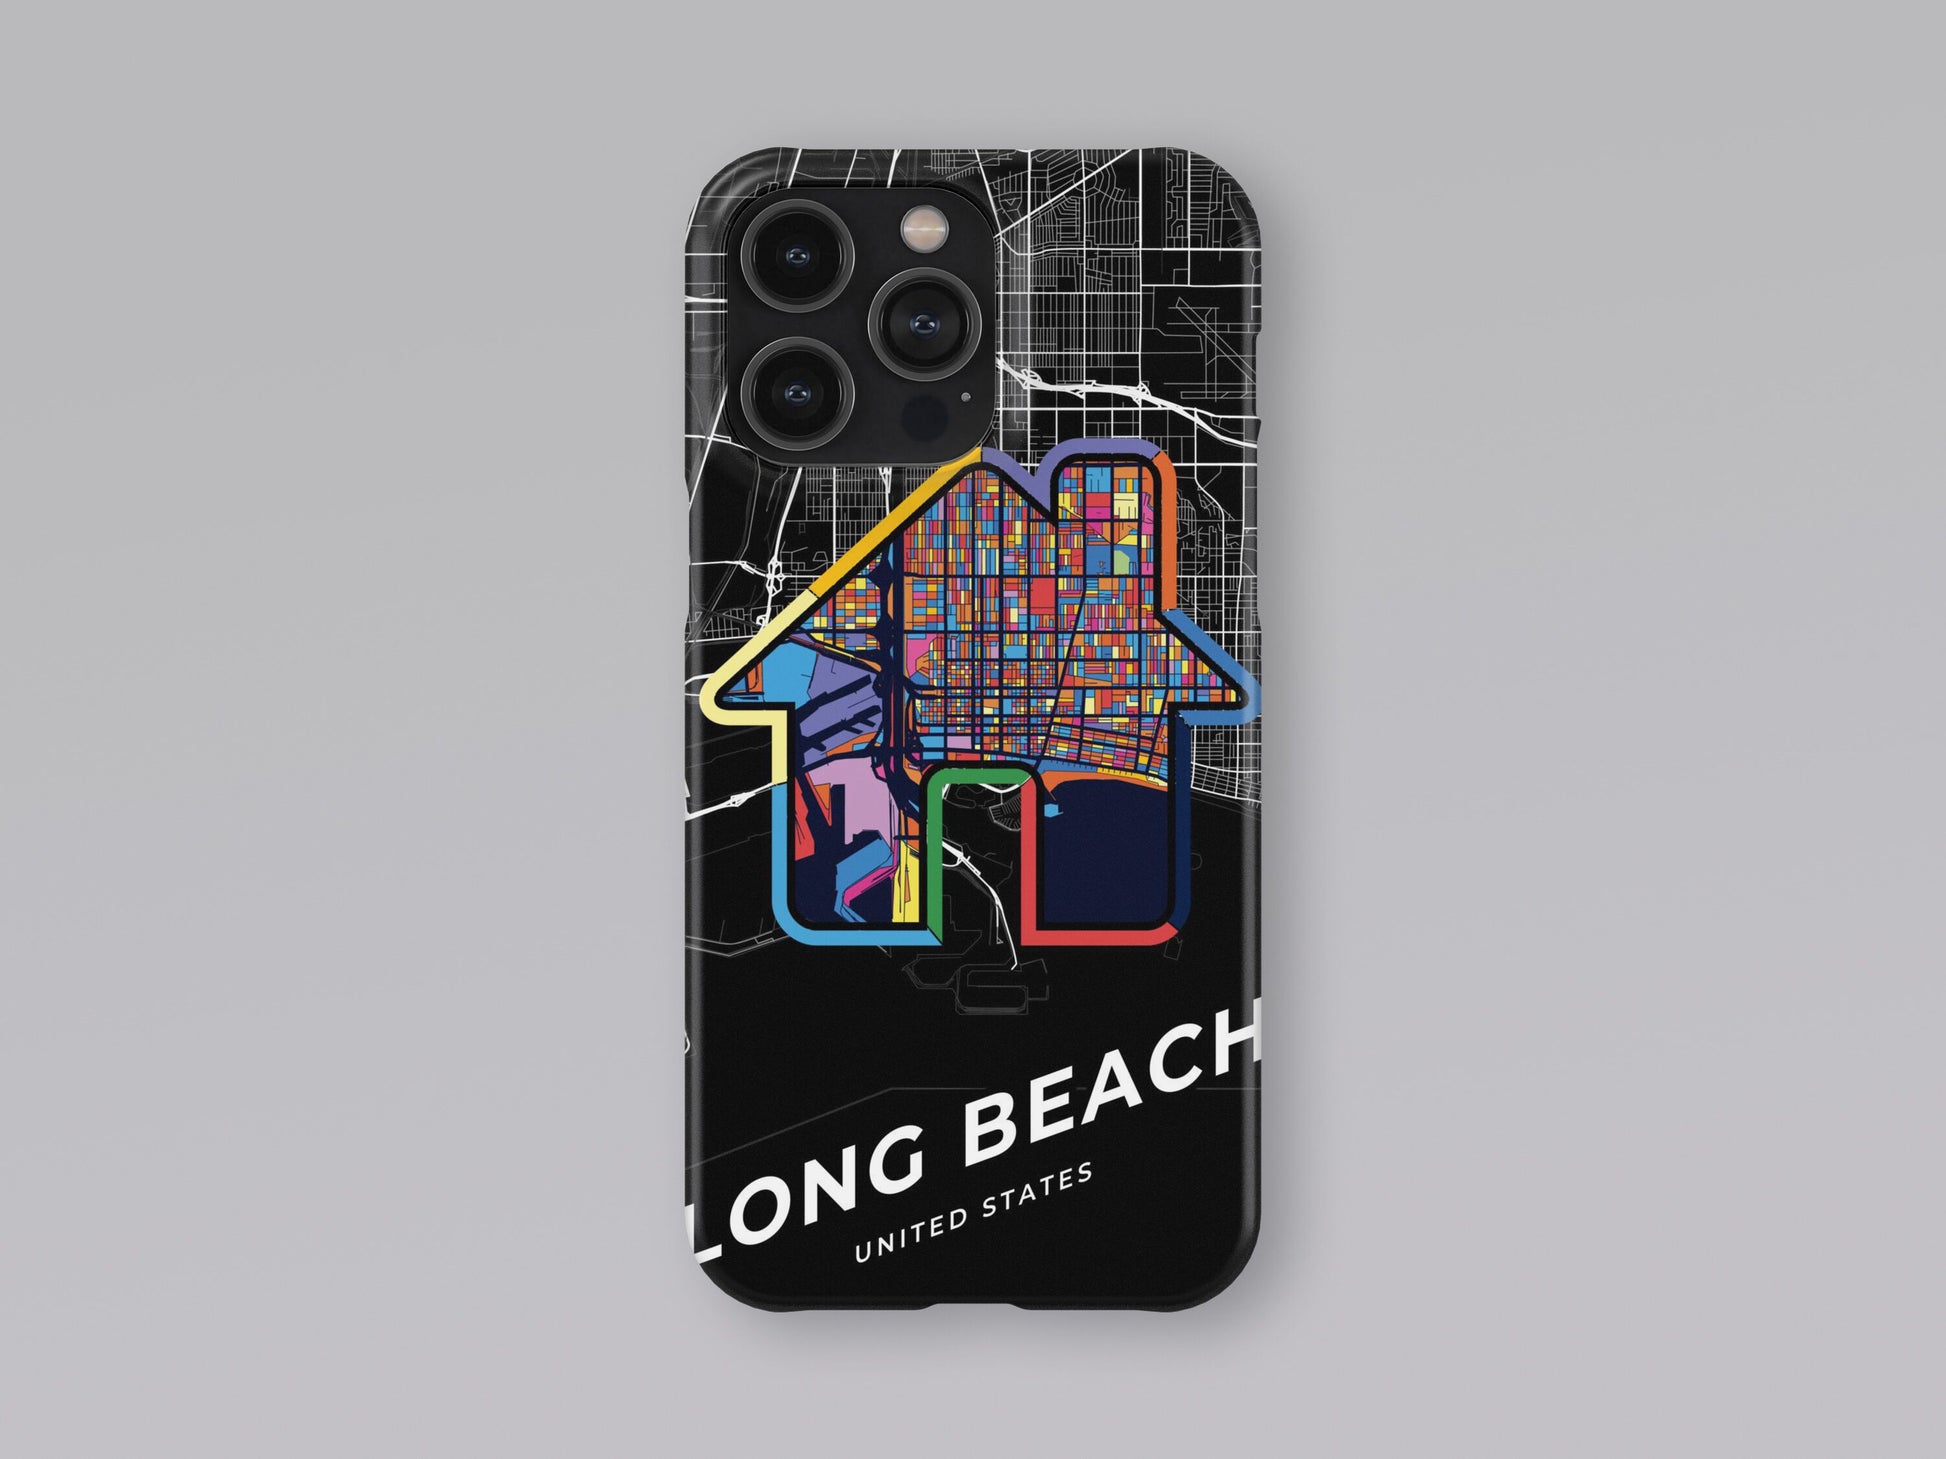 Long Beach California slim phone case with colorful icon. Birthday, wedding or housewarming gift. Couple match cases. 3